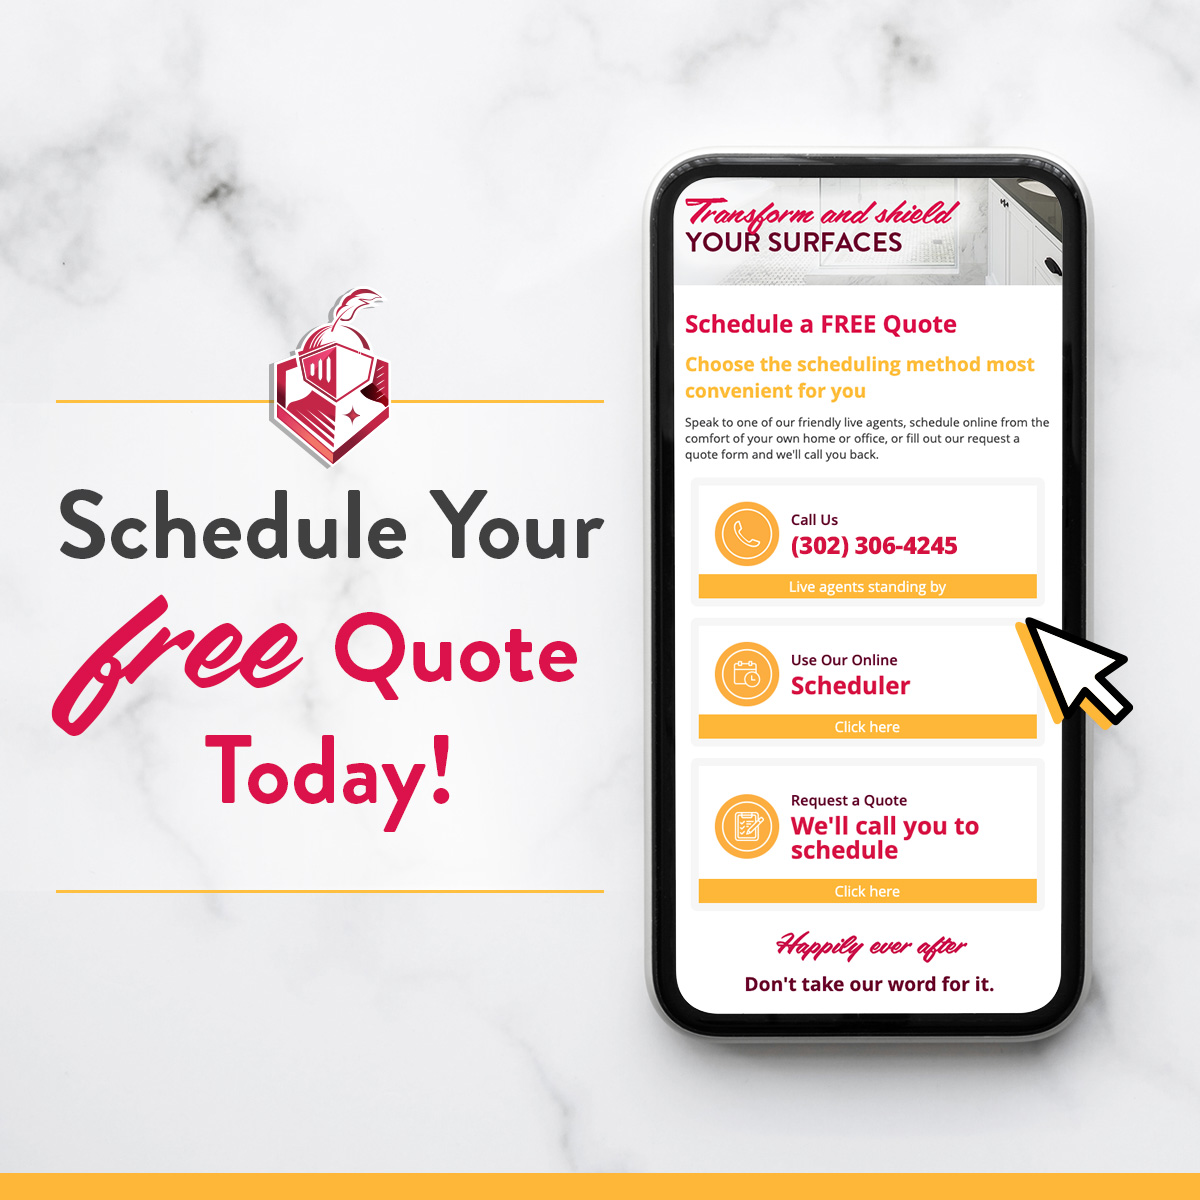 Schedule your Free Quote Today!